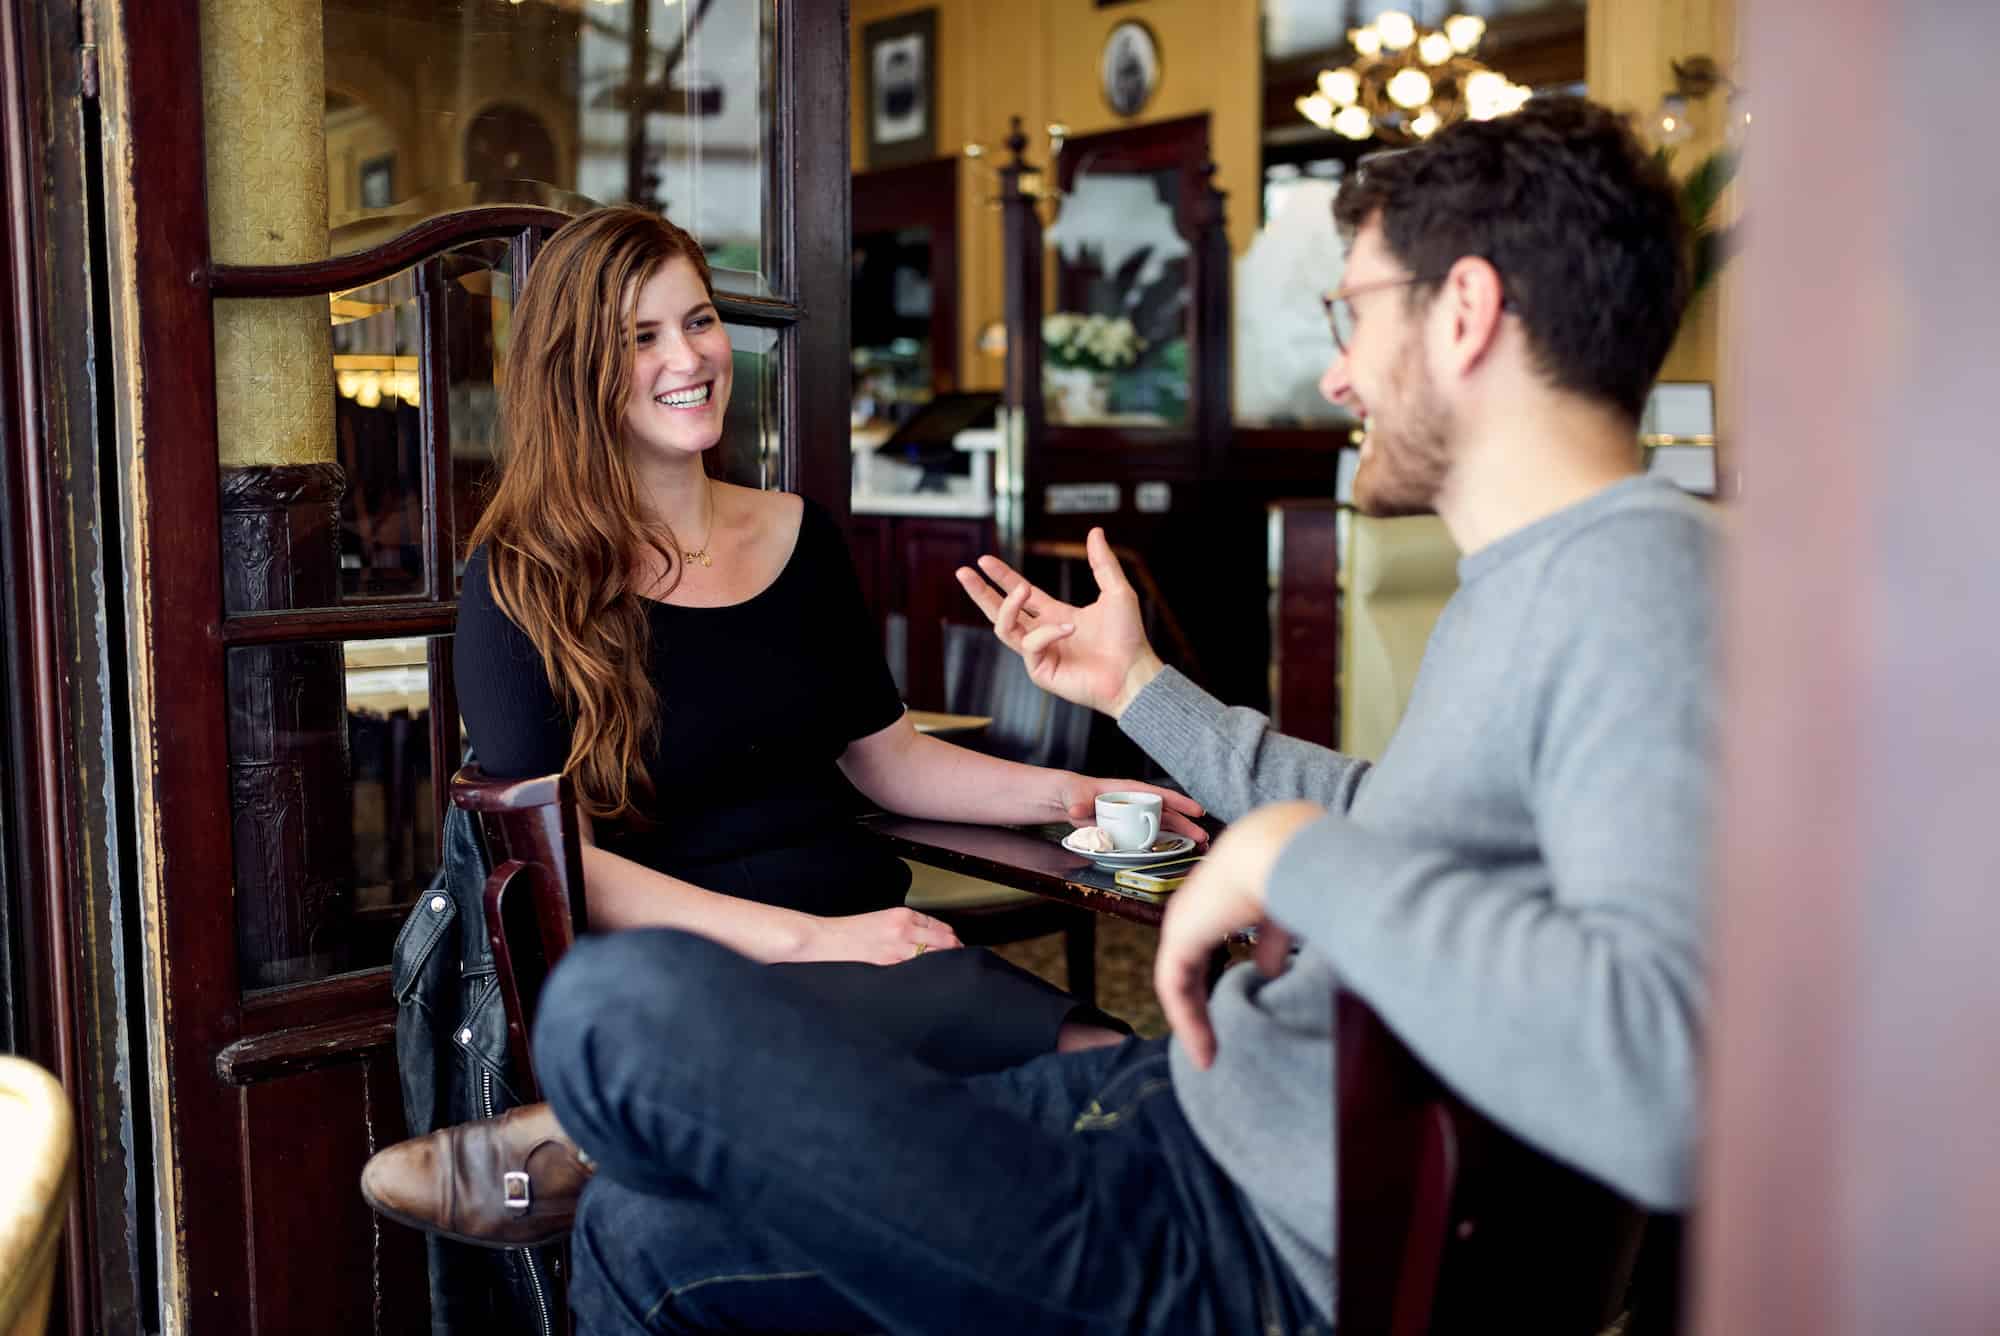 A man and woman sit laughing at a cafe table.